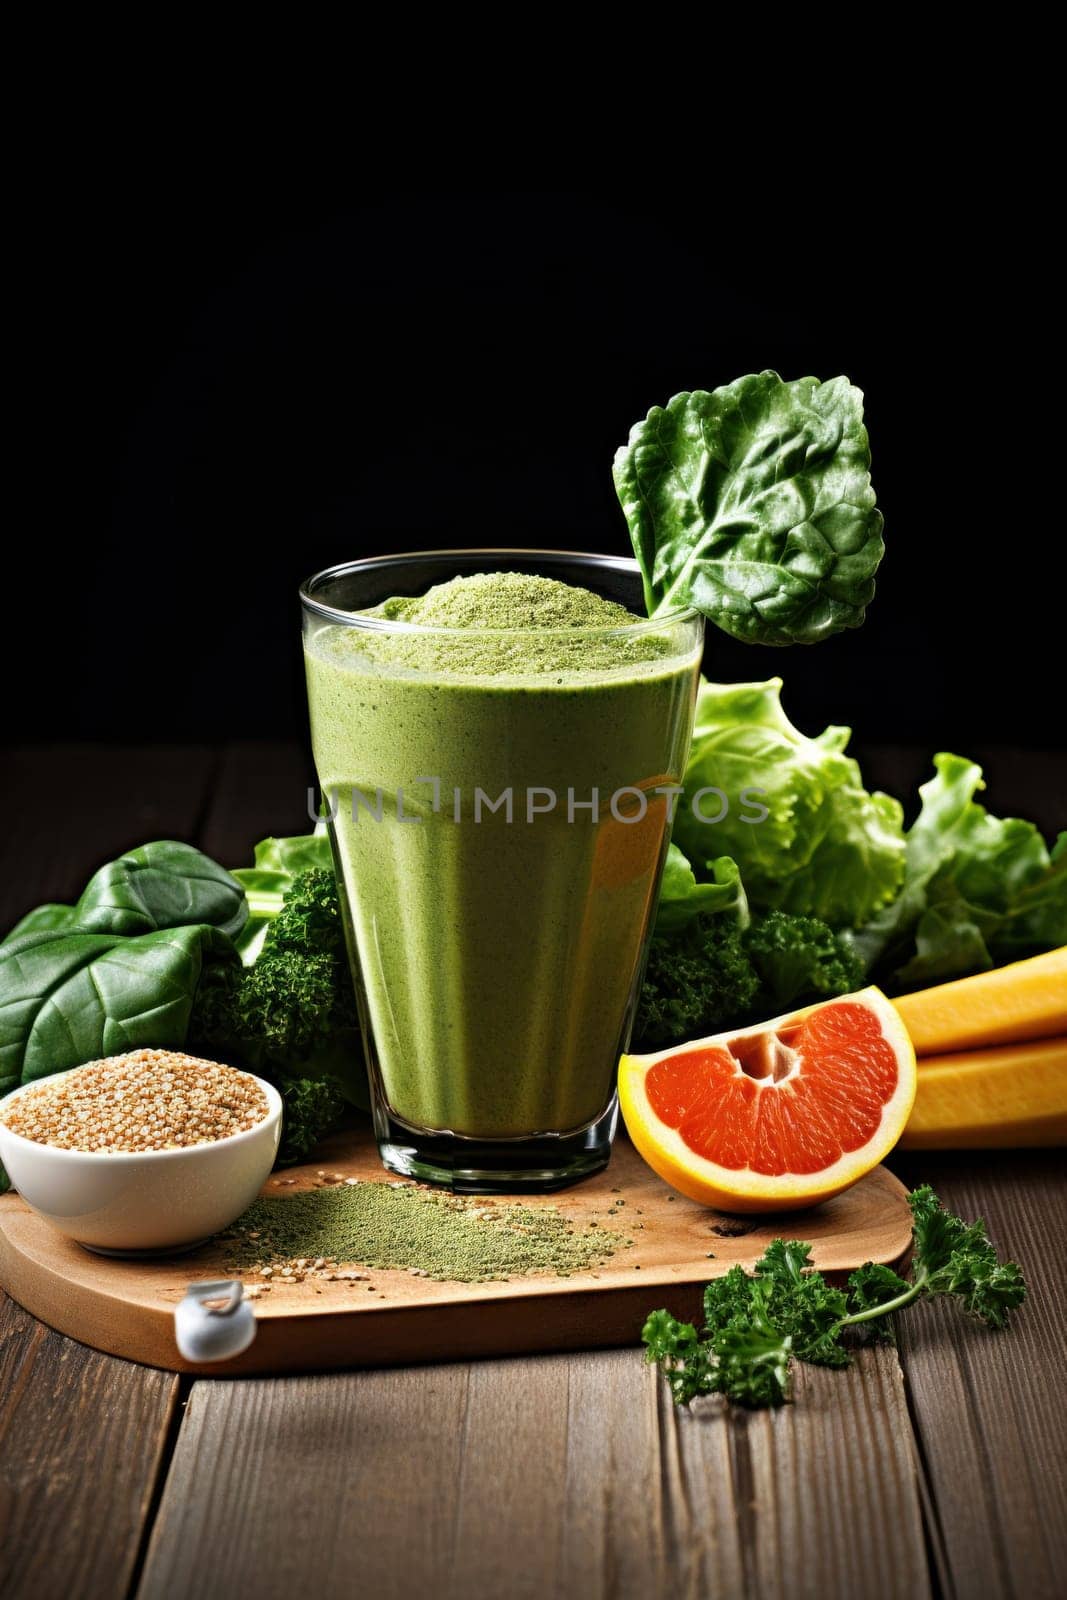 A glass of green smoothie next to some fruits and vegetables, AI by starush